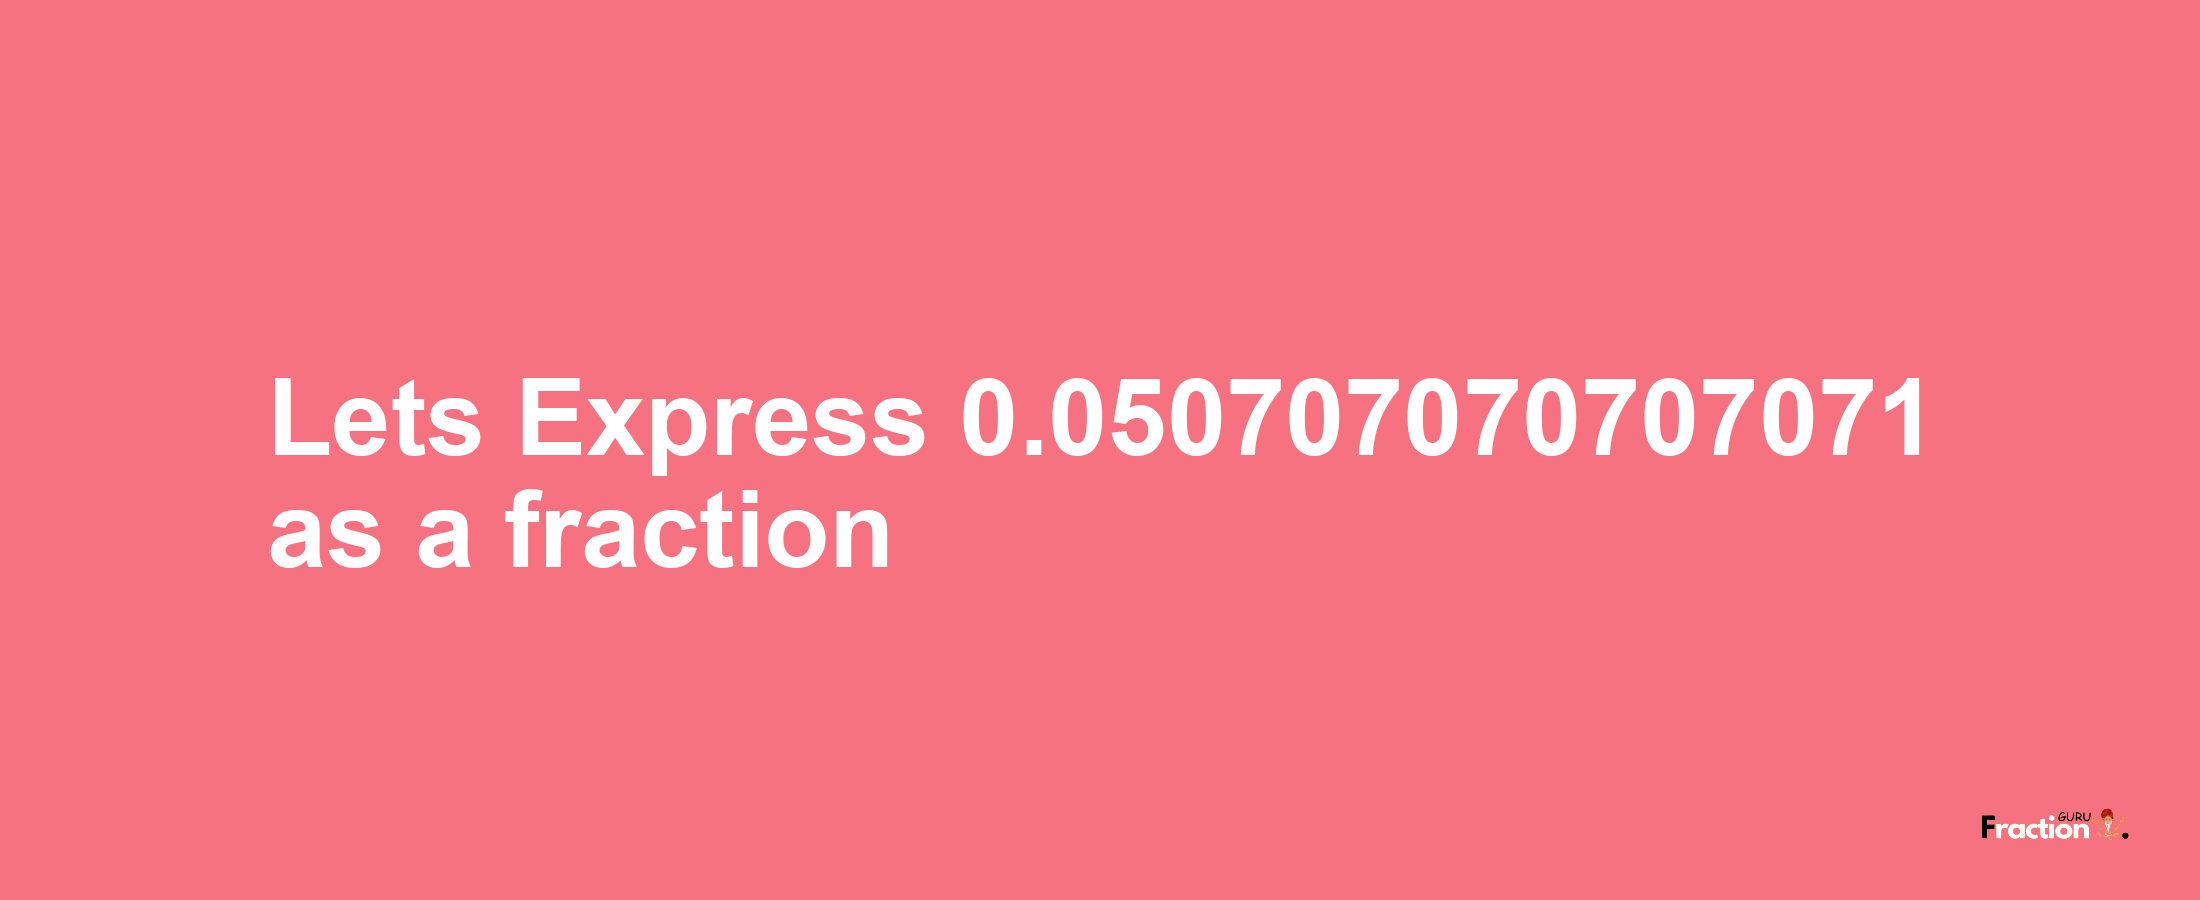 Lets Express 0.050707070707071 as afraction